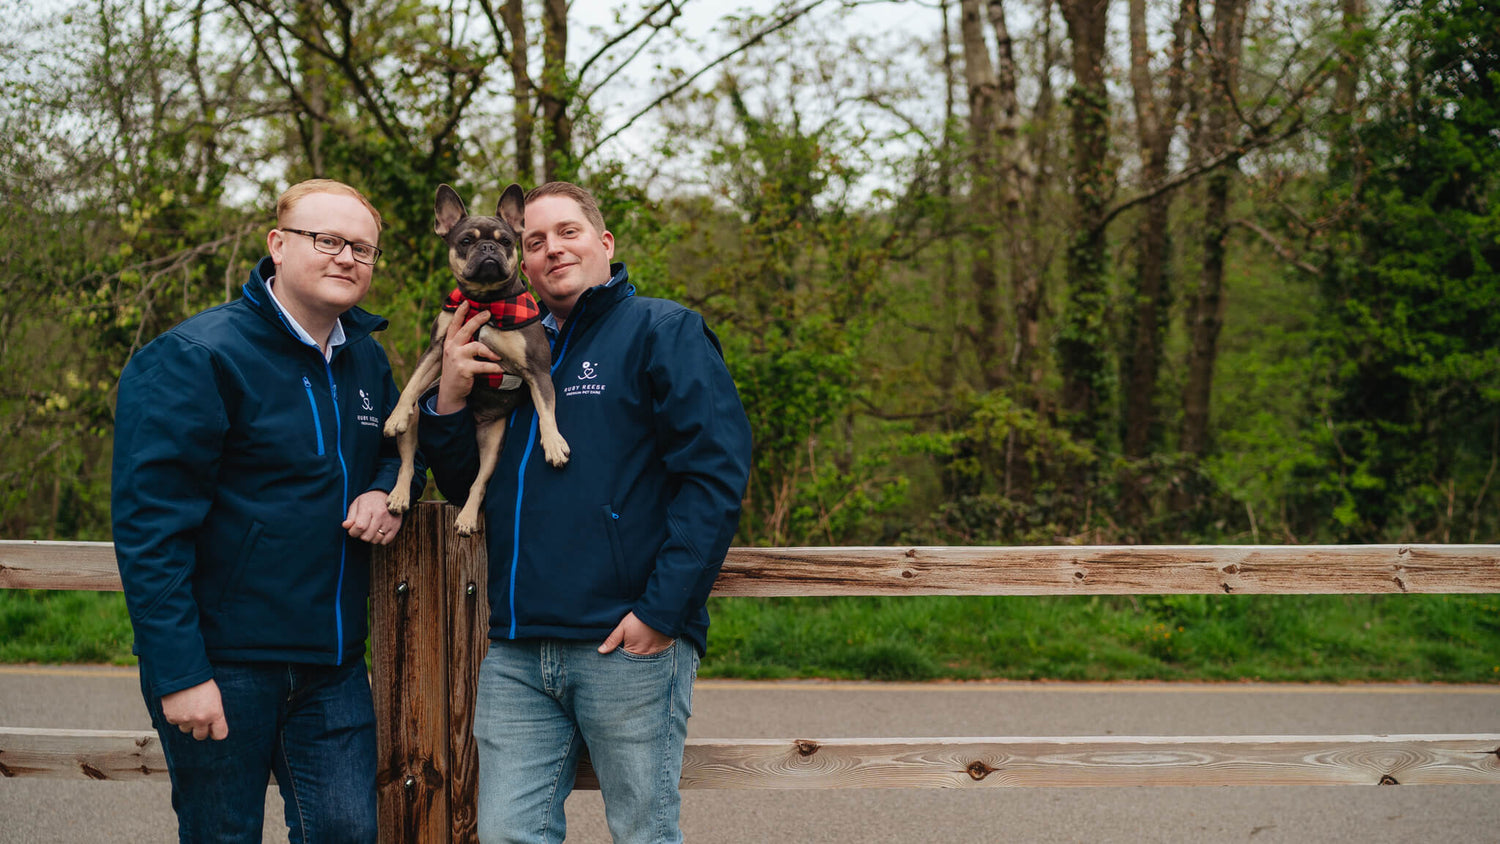 The Ruby Reese Team: Chris, Killian and Ruby the French Bulldog in a park in front of a wooden fence